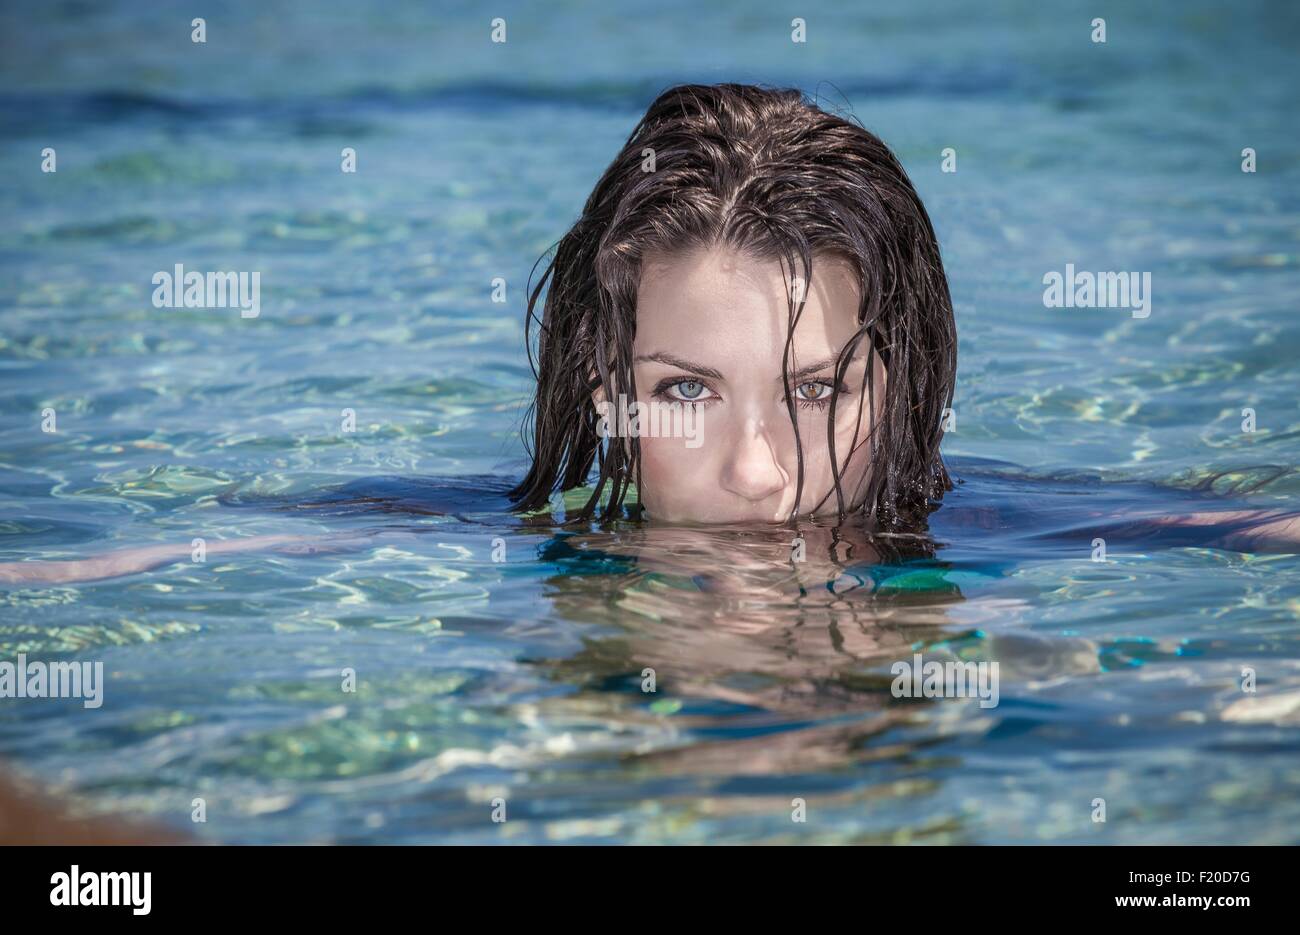 Portrait of beautiful young woman with face submerged in sea Stock Photo